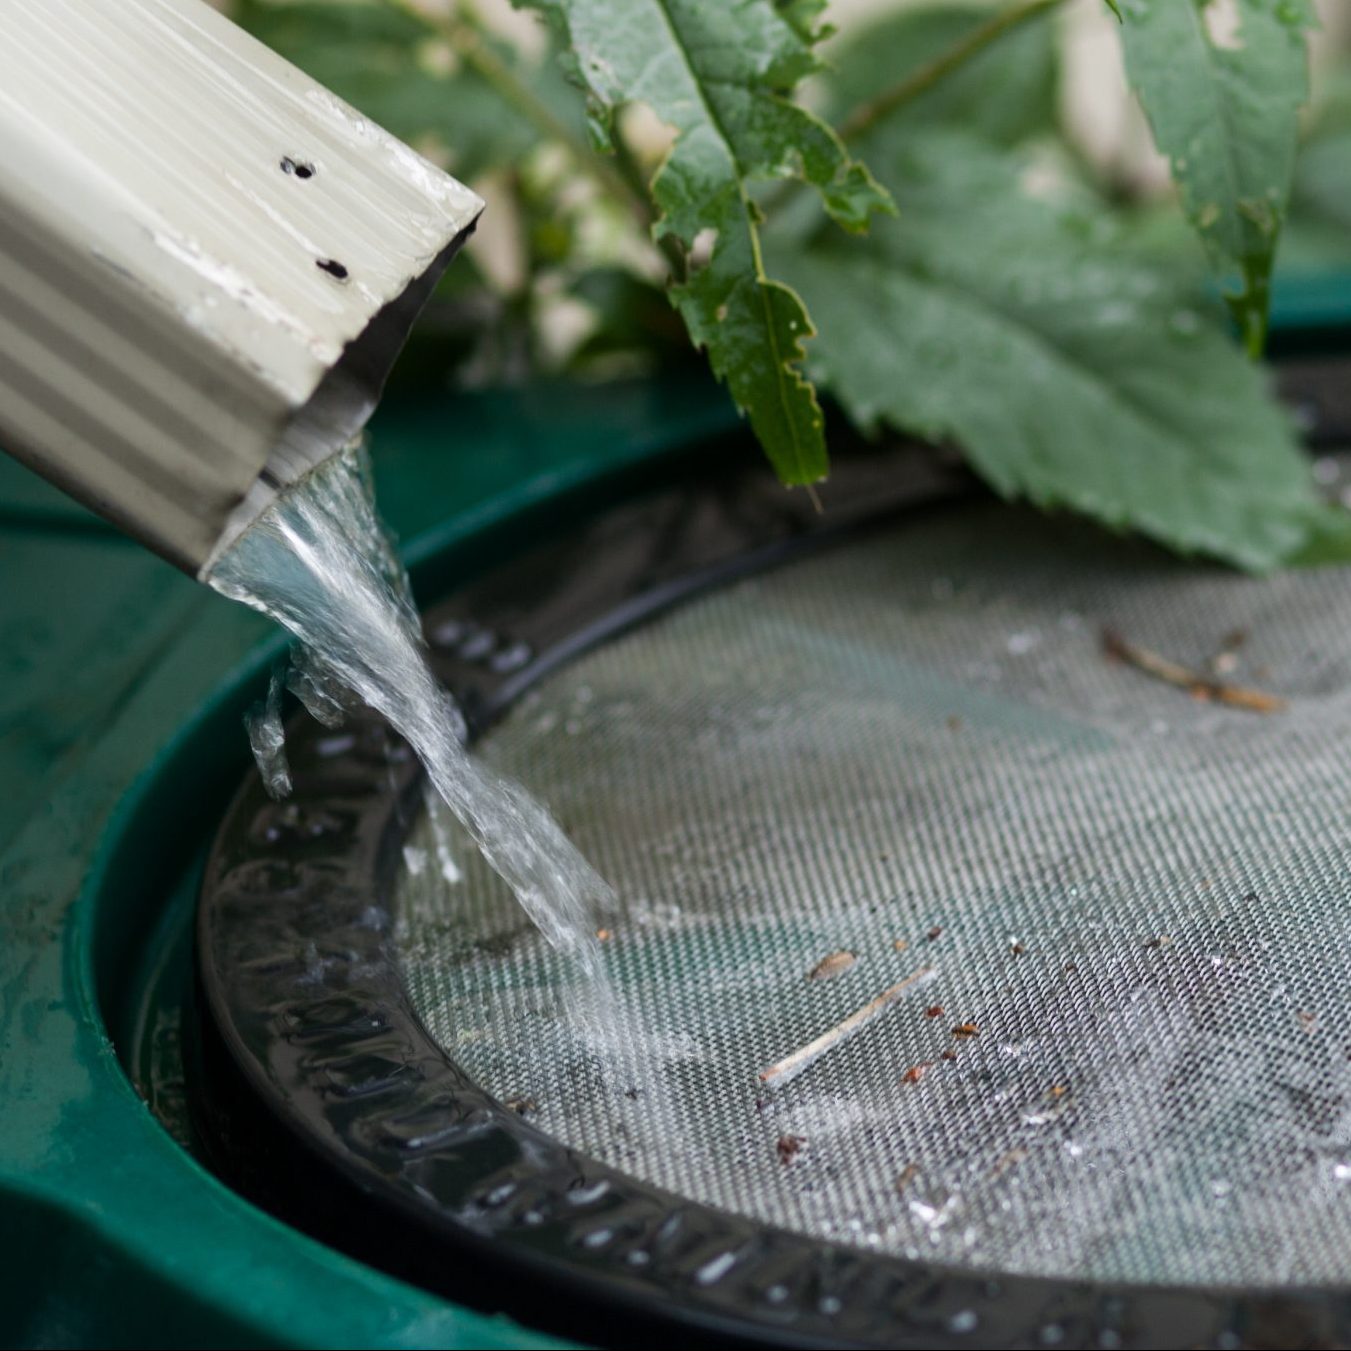 Water flows out of a drain-spout into a rain collection barrel.